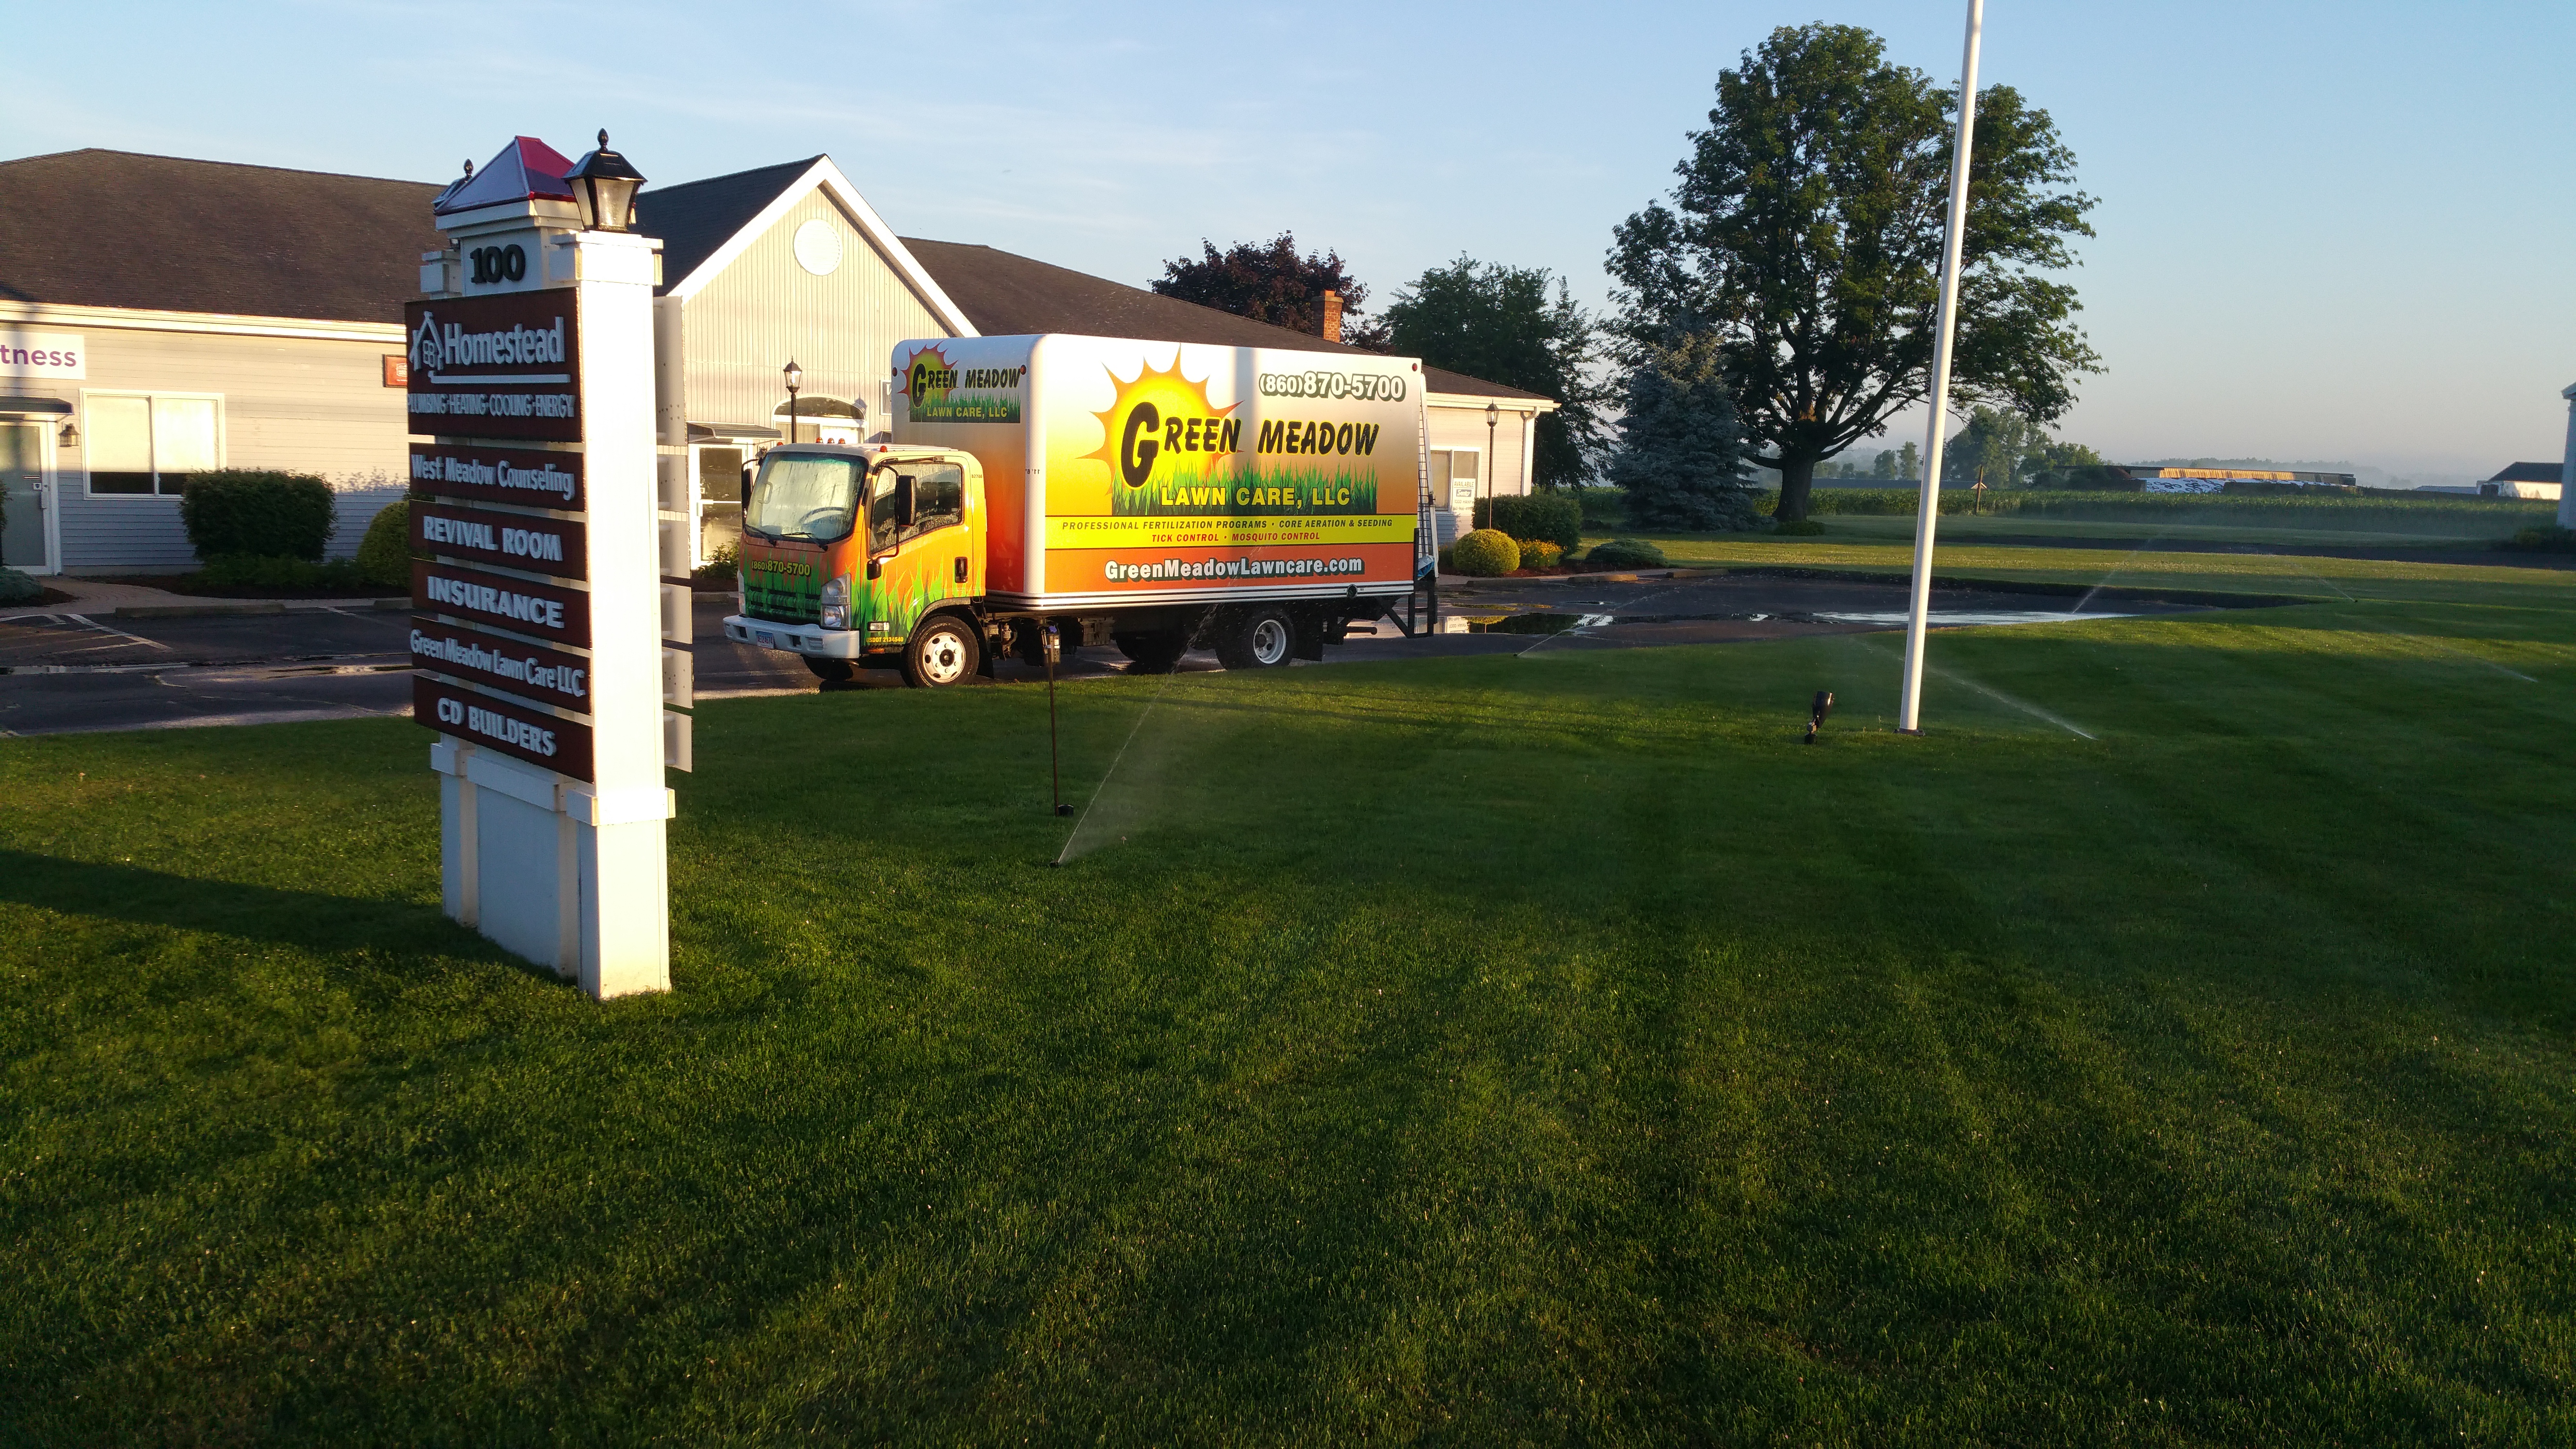 Top lawn care companies in south windsor and ellington connecticut 